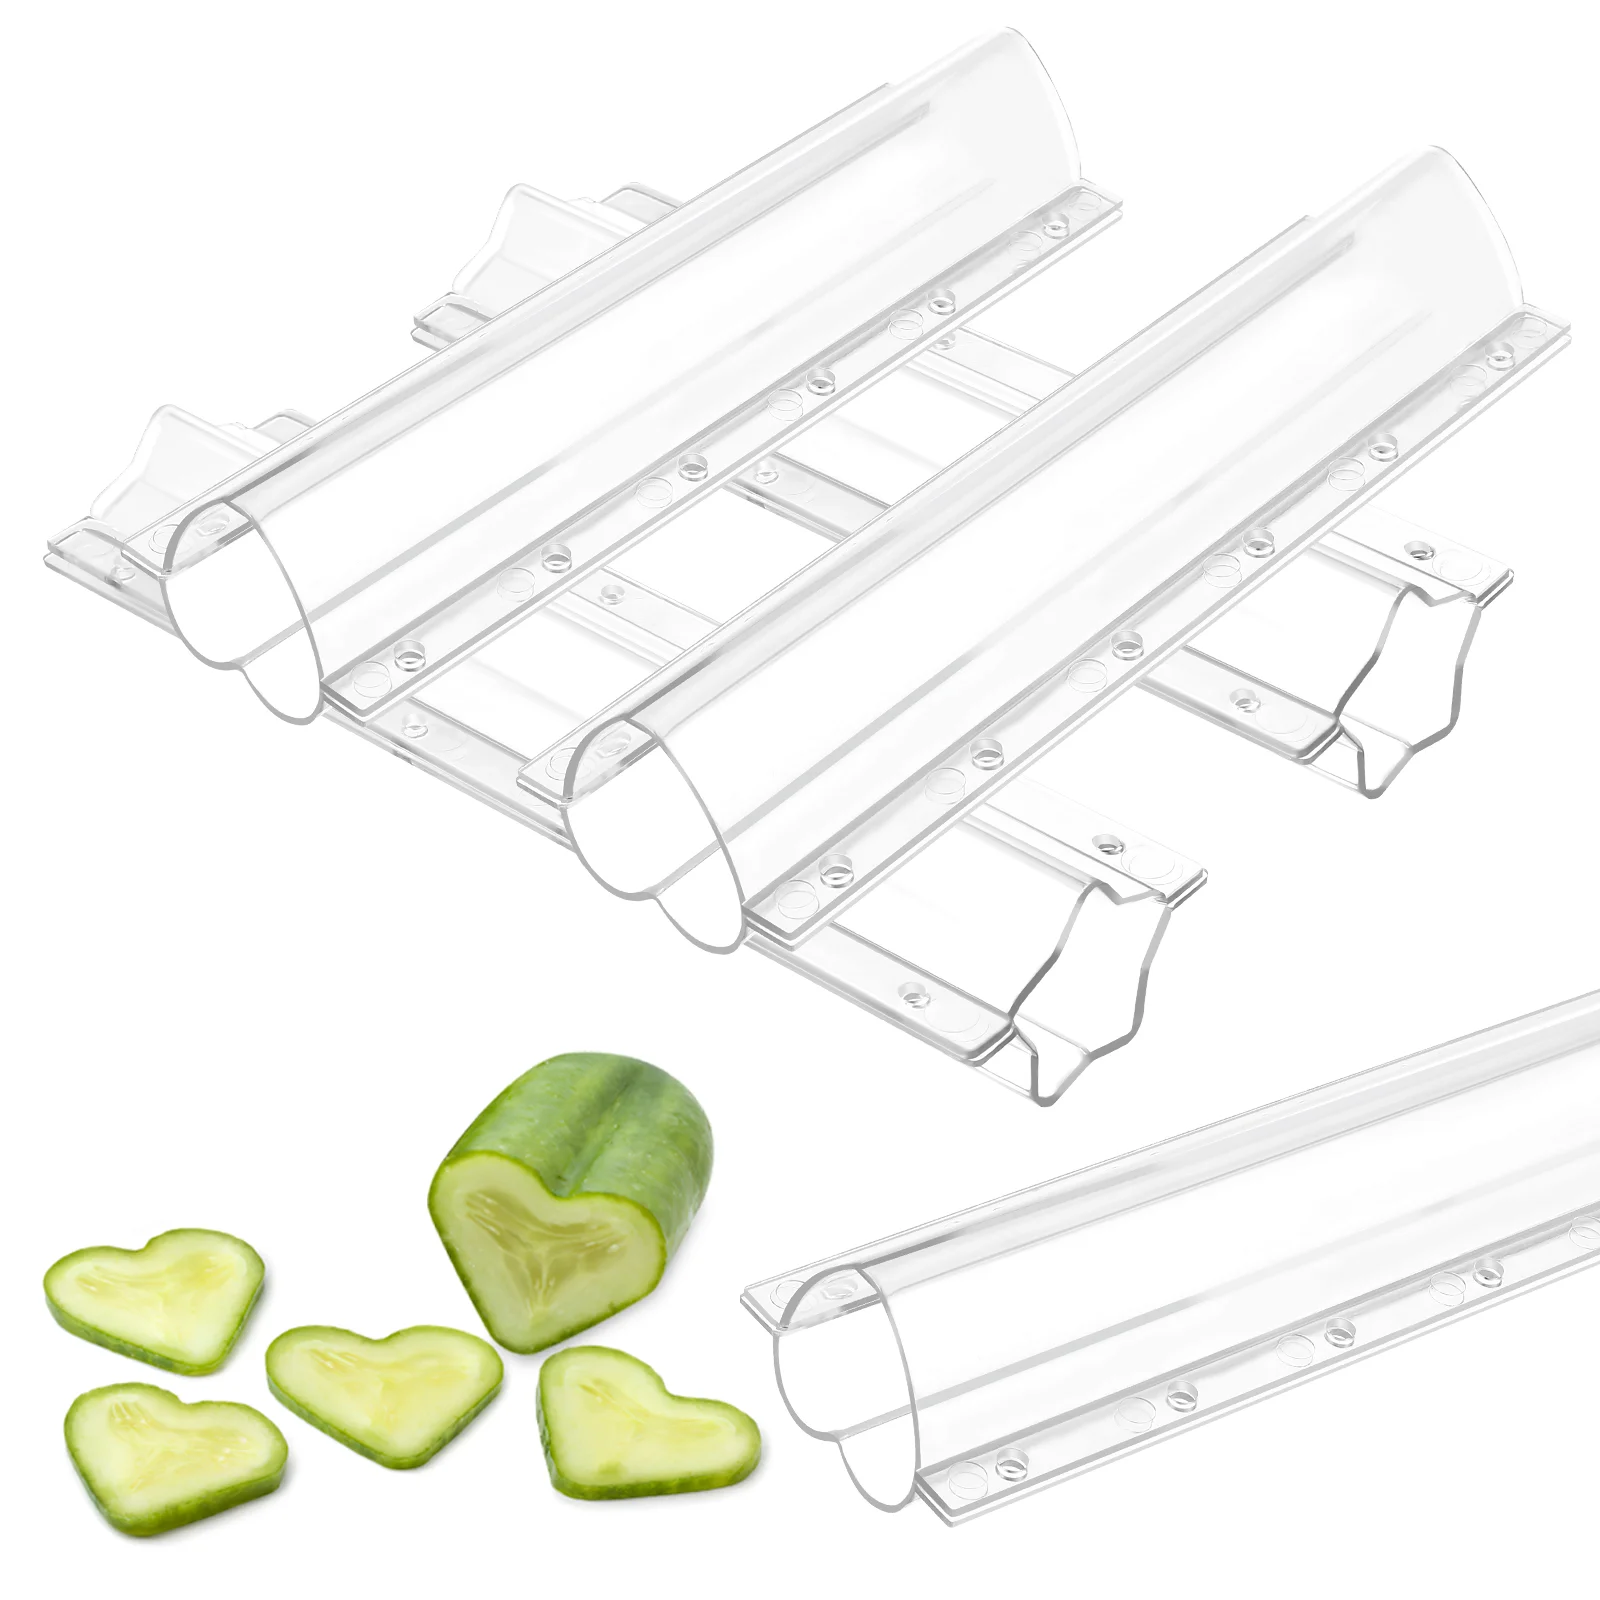 

Shaped Growth Mold Cucumber Molds Vegetable Shaping Forming Fruit Growing Planting Accessories Cucumbers